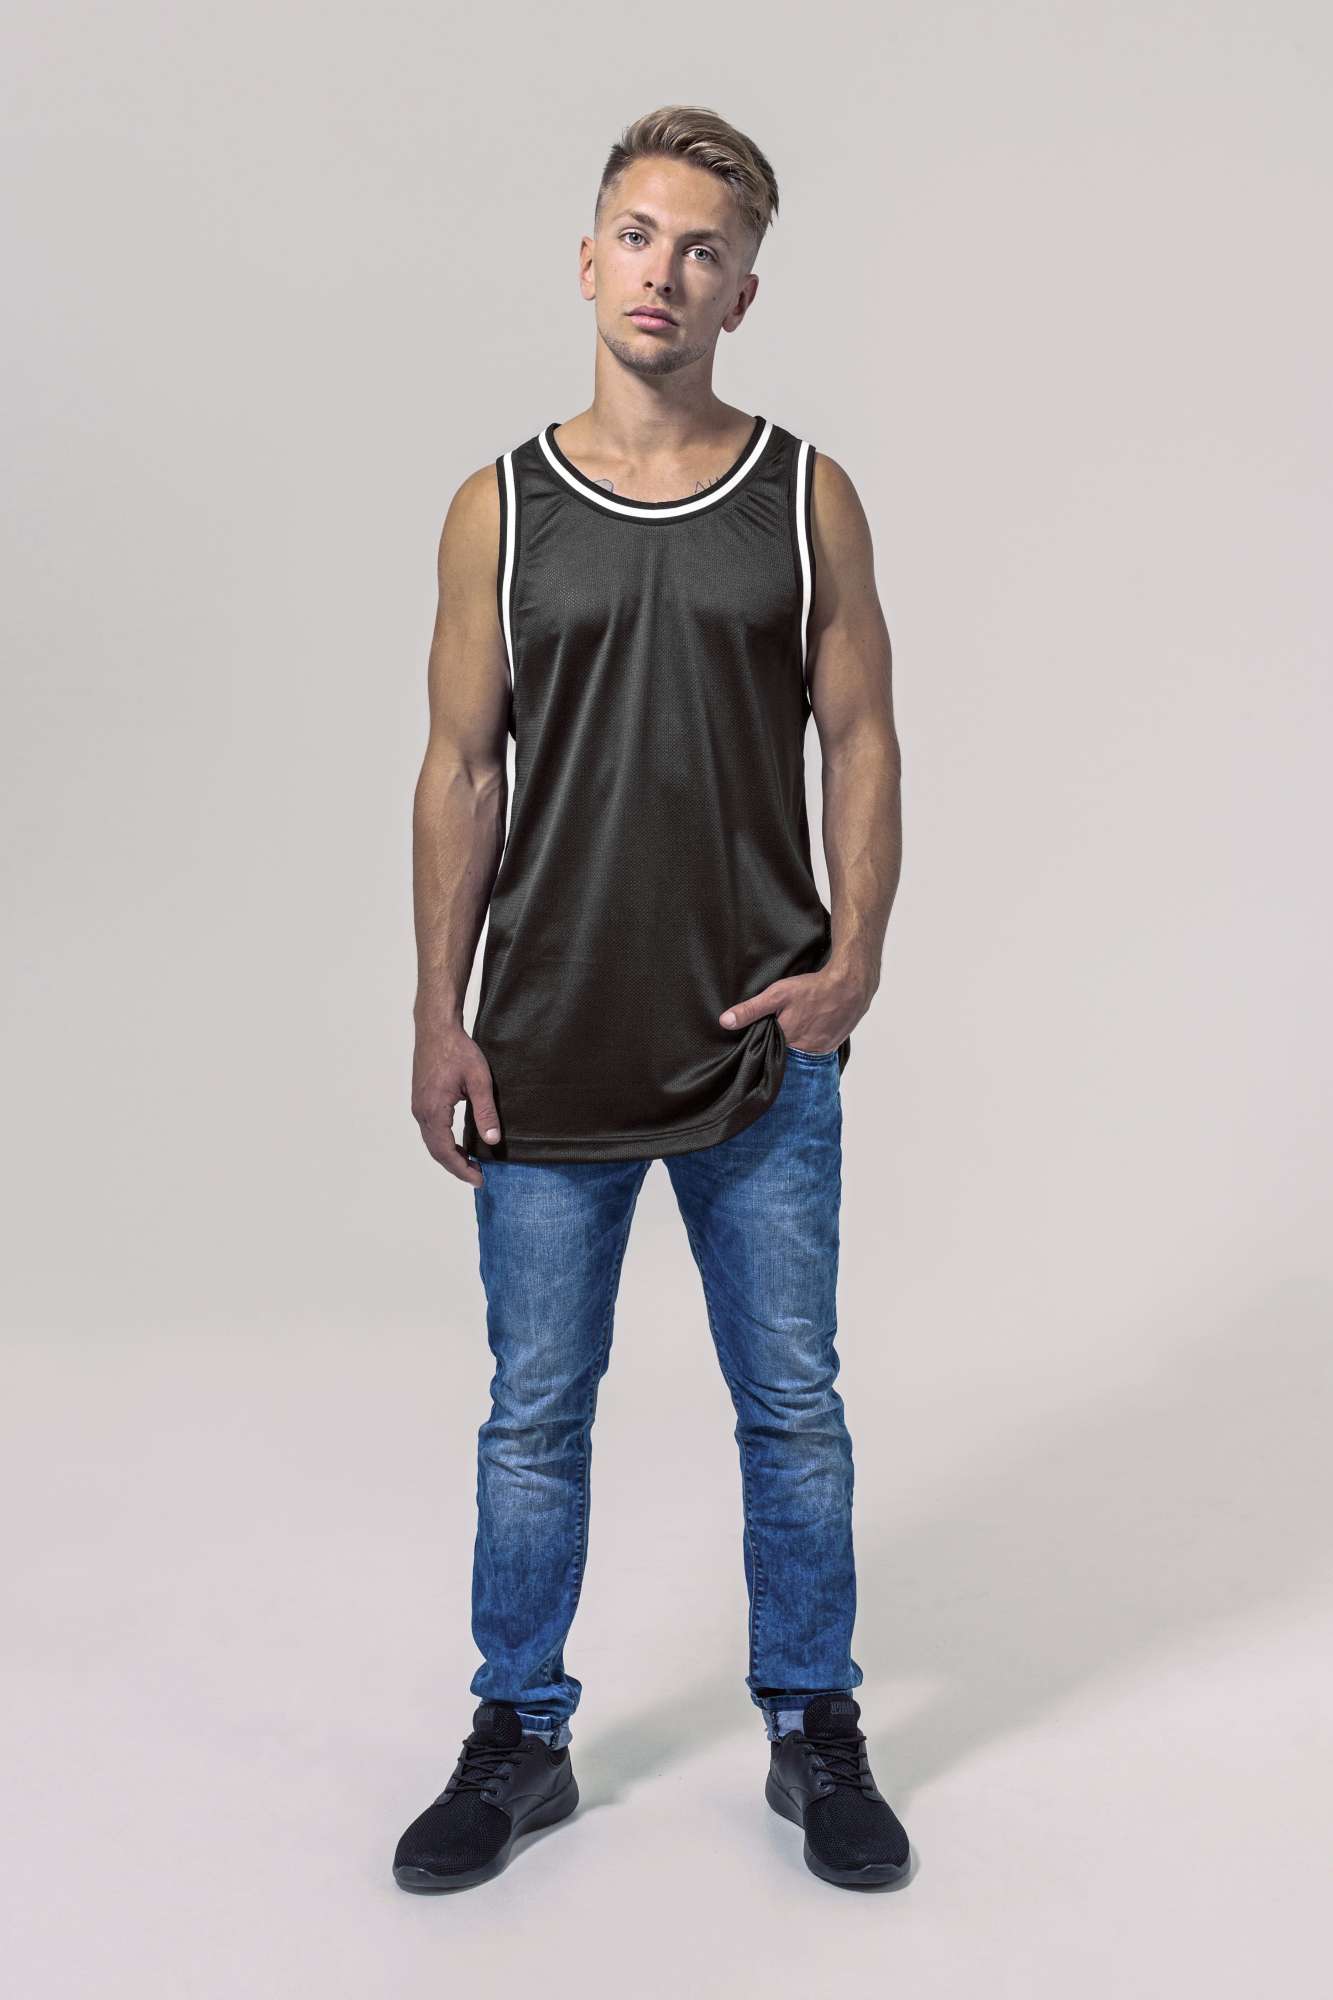 Build Your Brand Mesh Tanktop White/Black M (BY009)